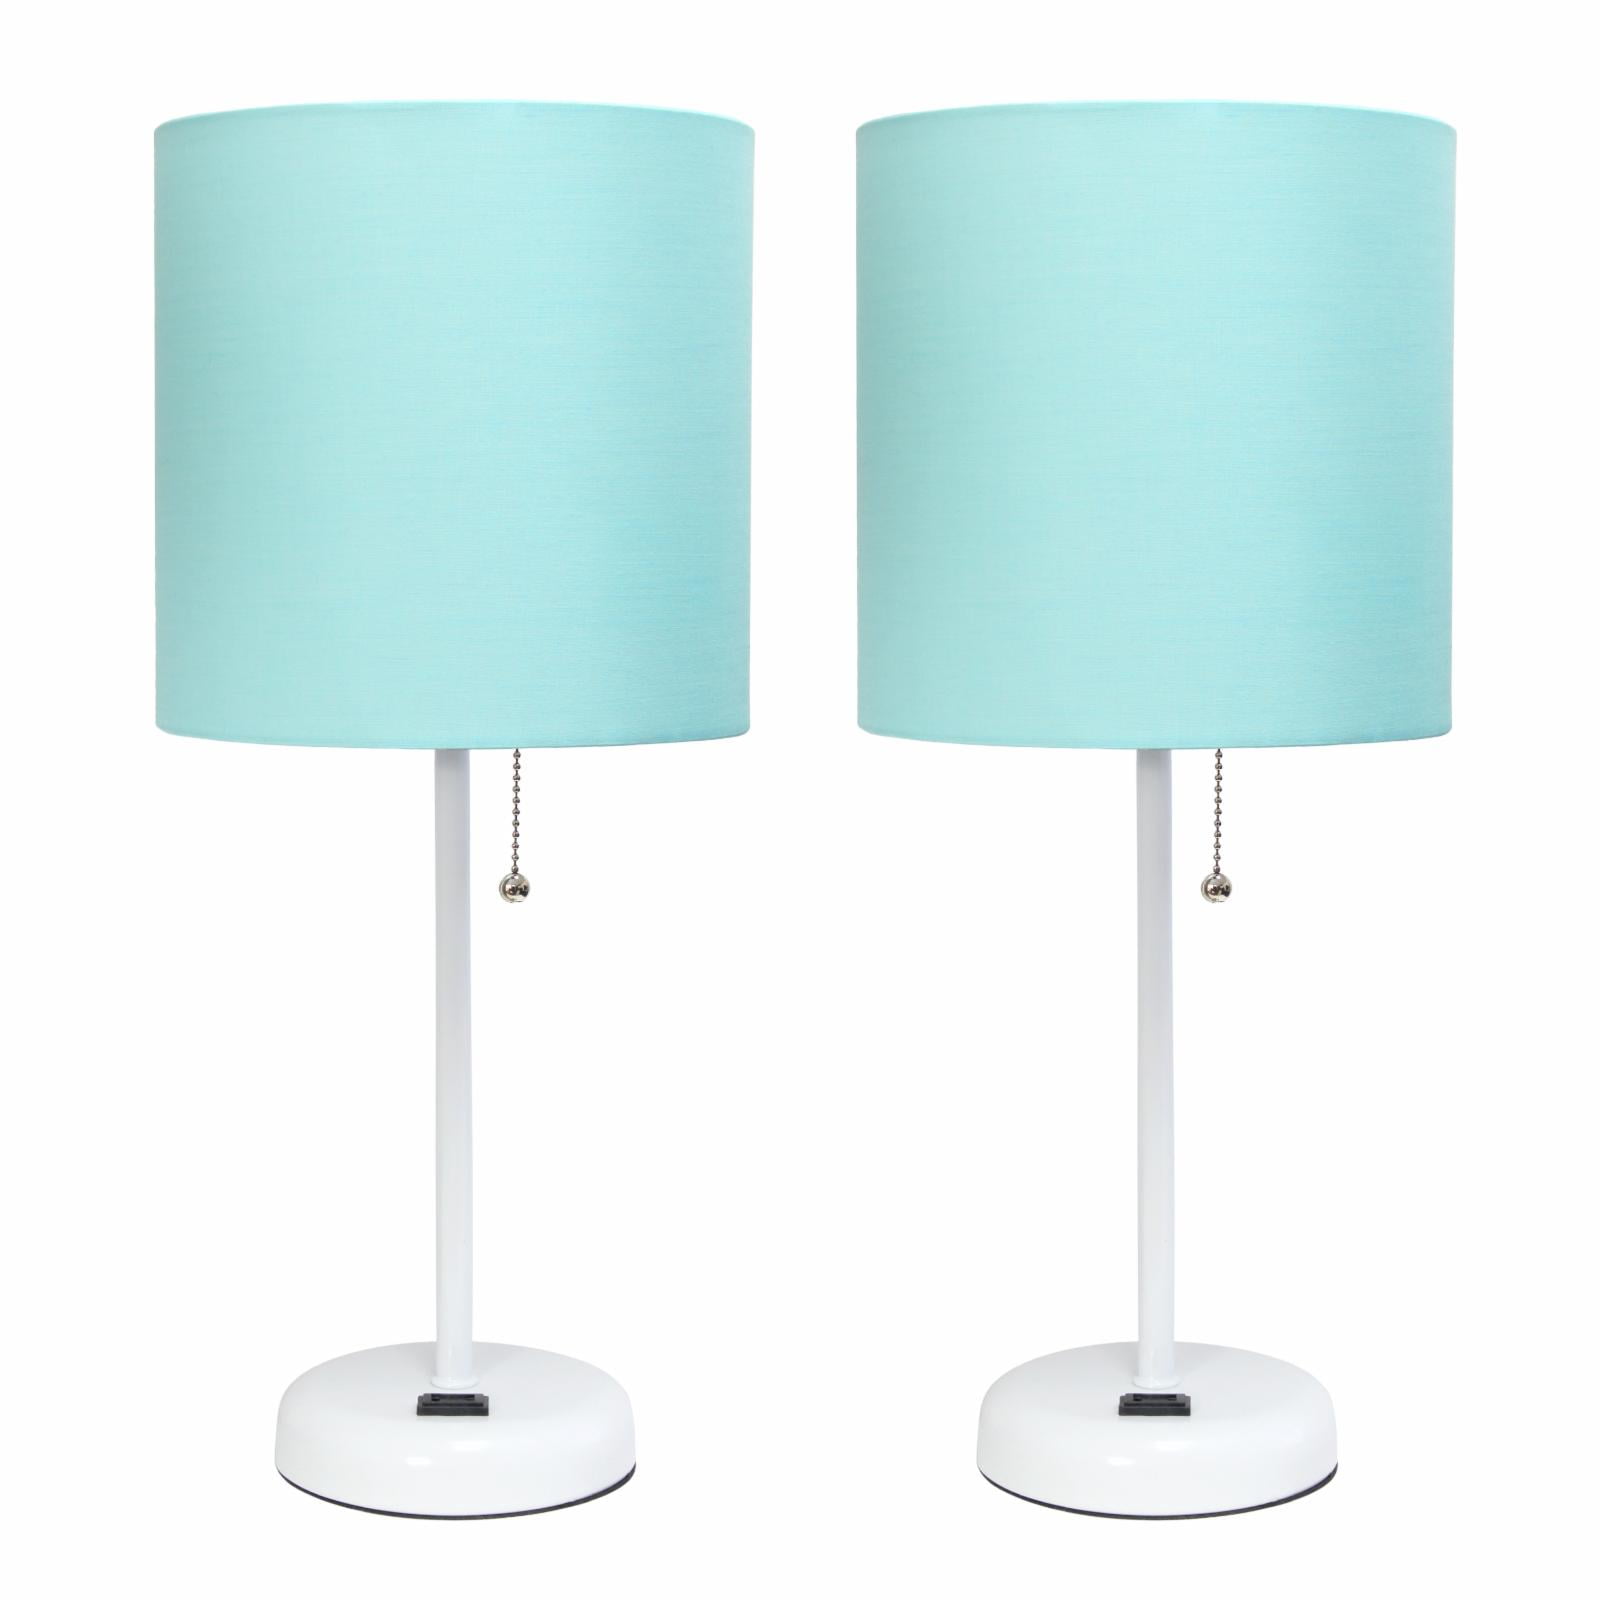 Lc2001-rgd-2pk Rose Gold Stick Table Lamp With Charging Outlet & Fabric Shade, White - Set Of 2